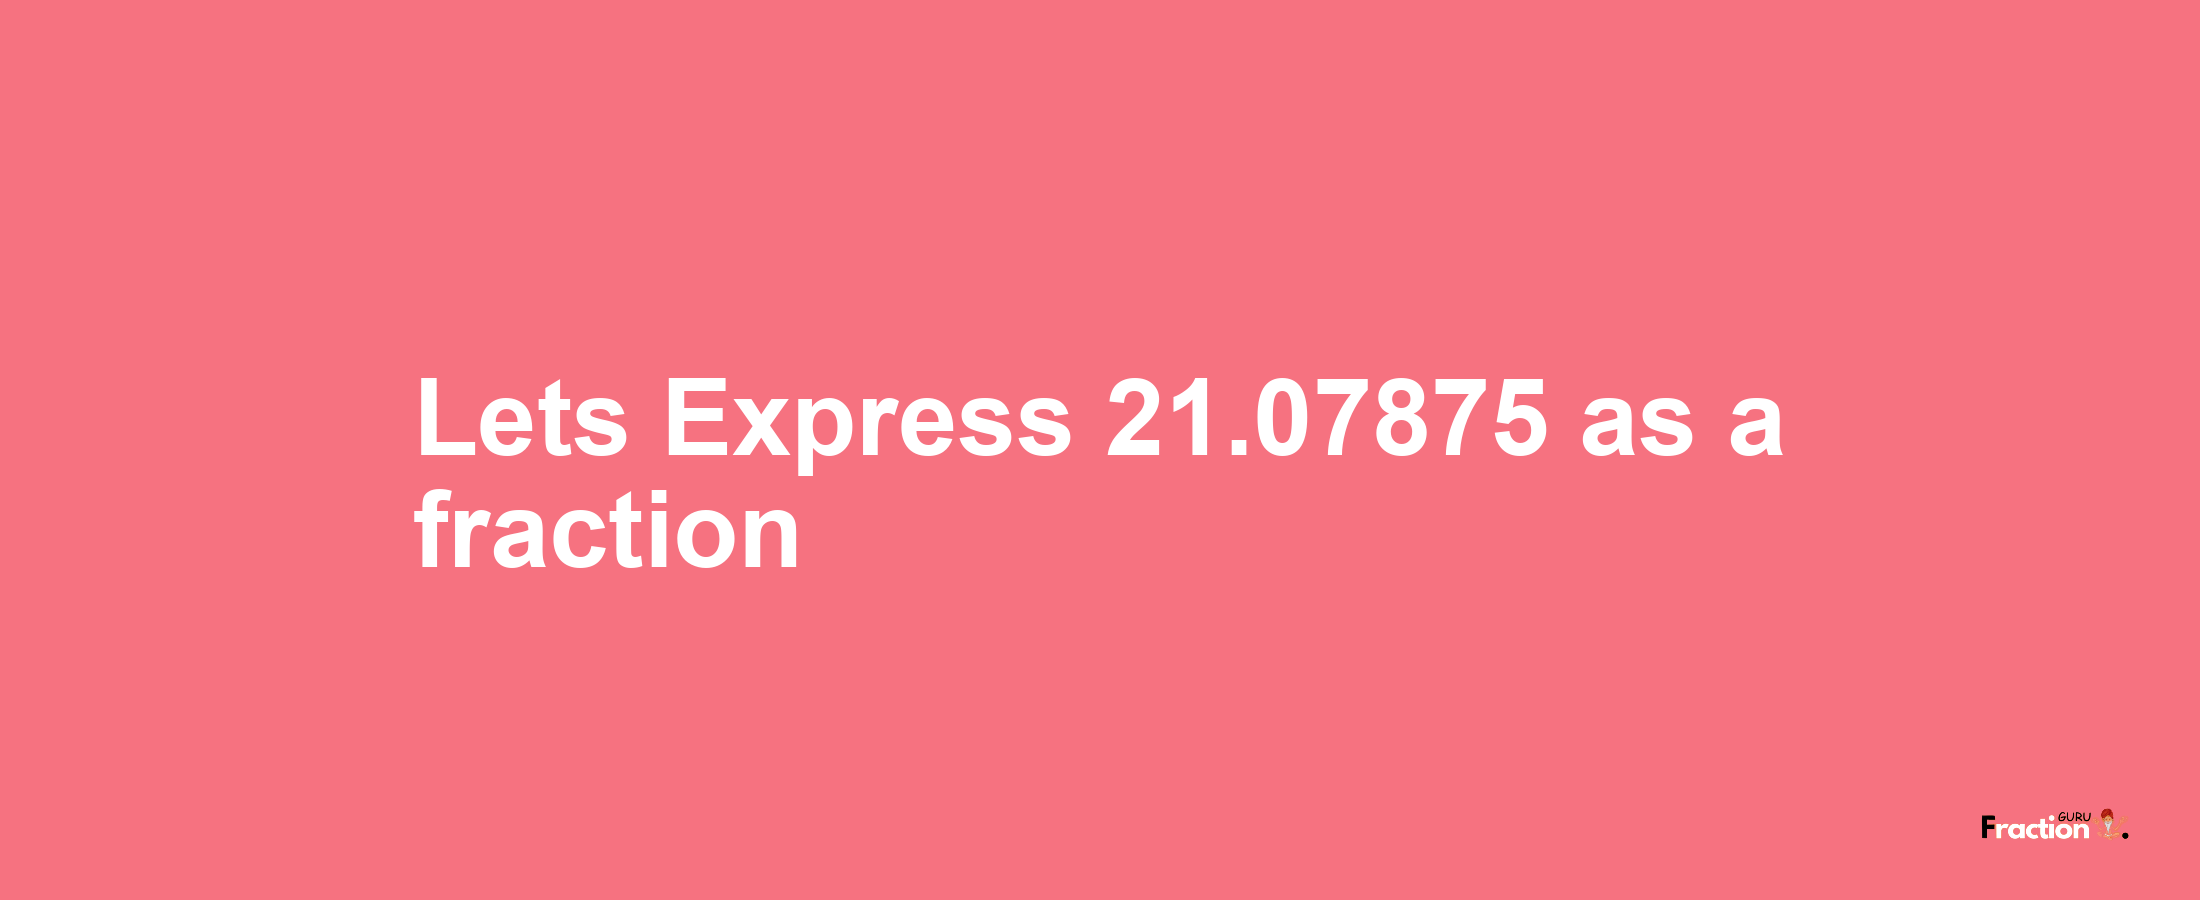 Lets Express 21.07875 as afraction